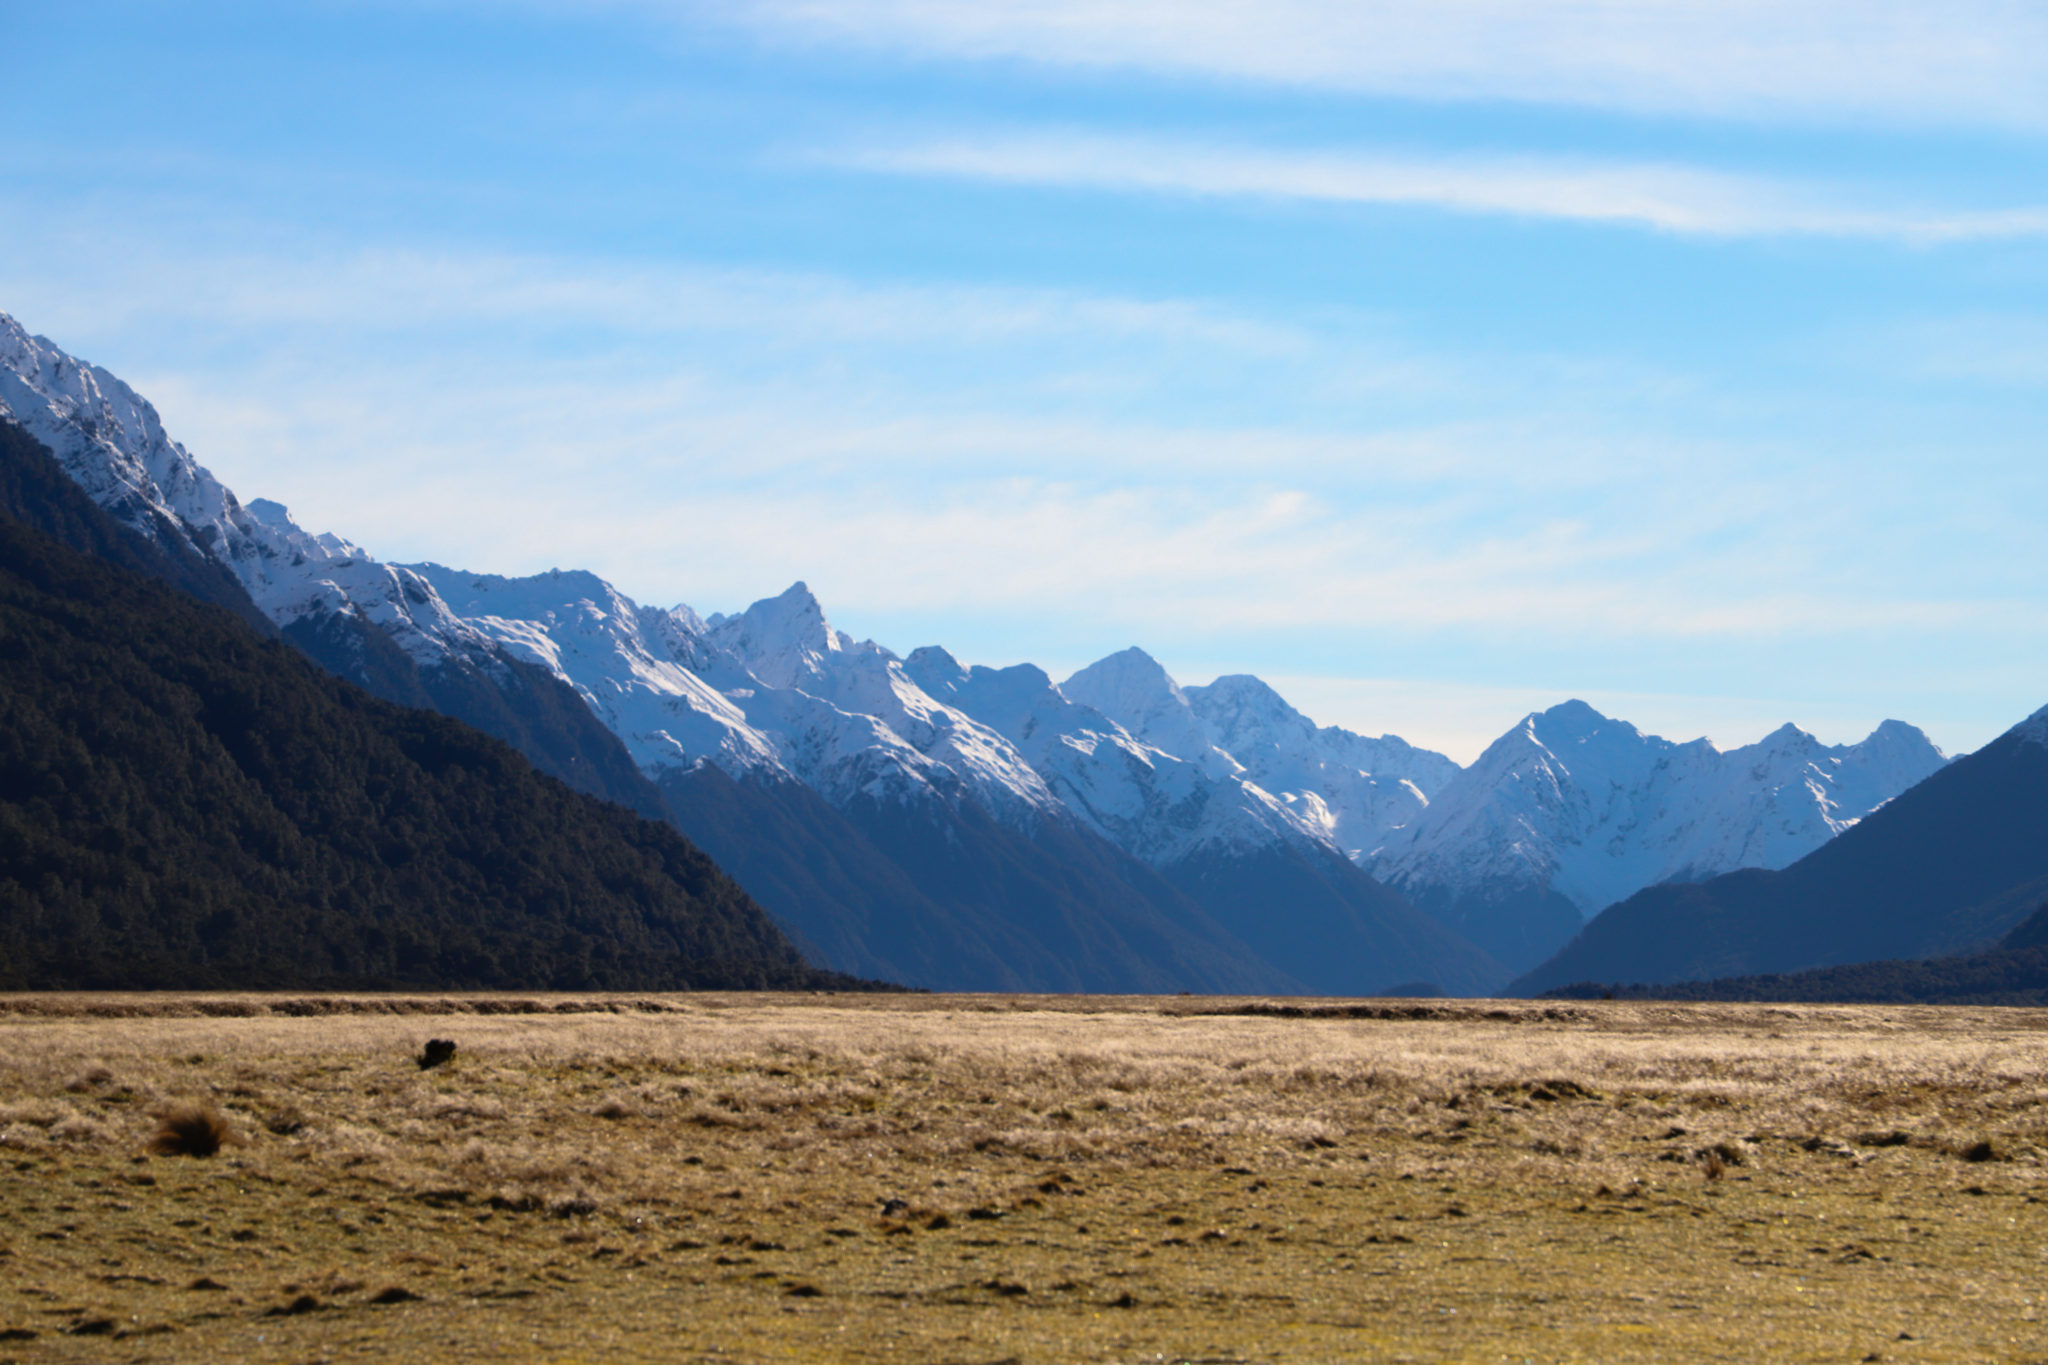 On the way to Milford Sound, New Zealand